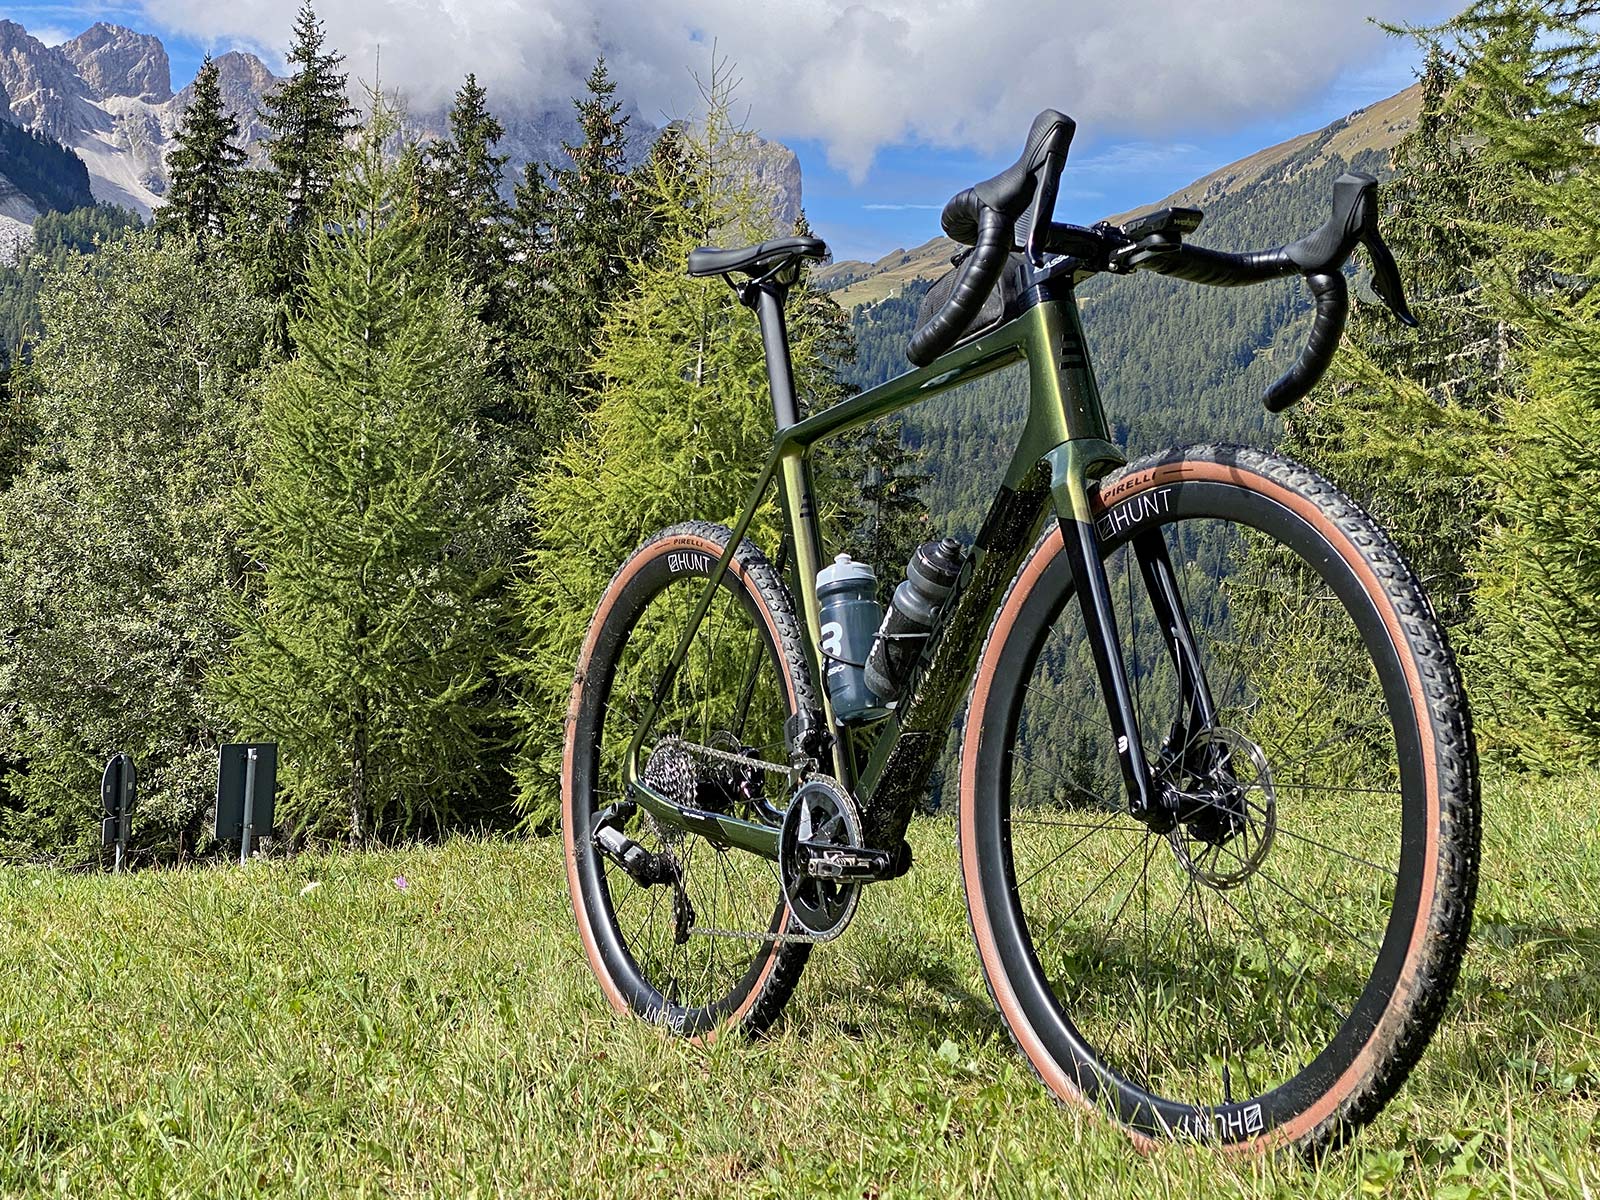 2022 Basso Palta II carbon gravel bike review made-in-Italy, angled